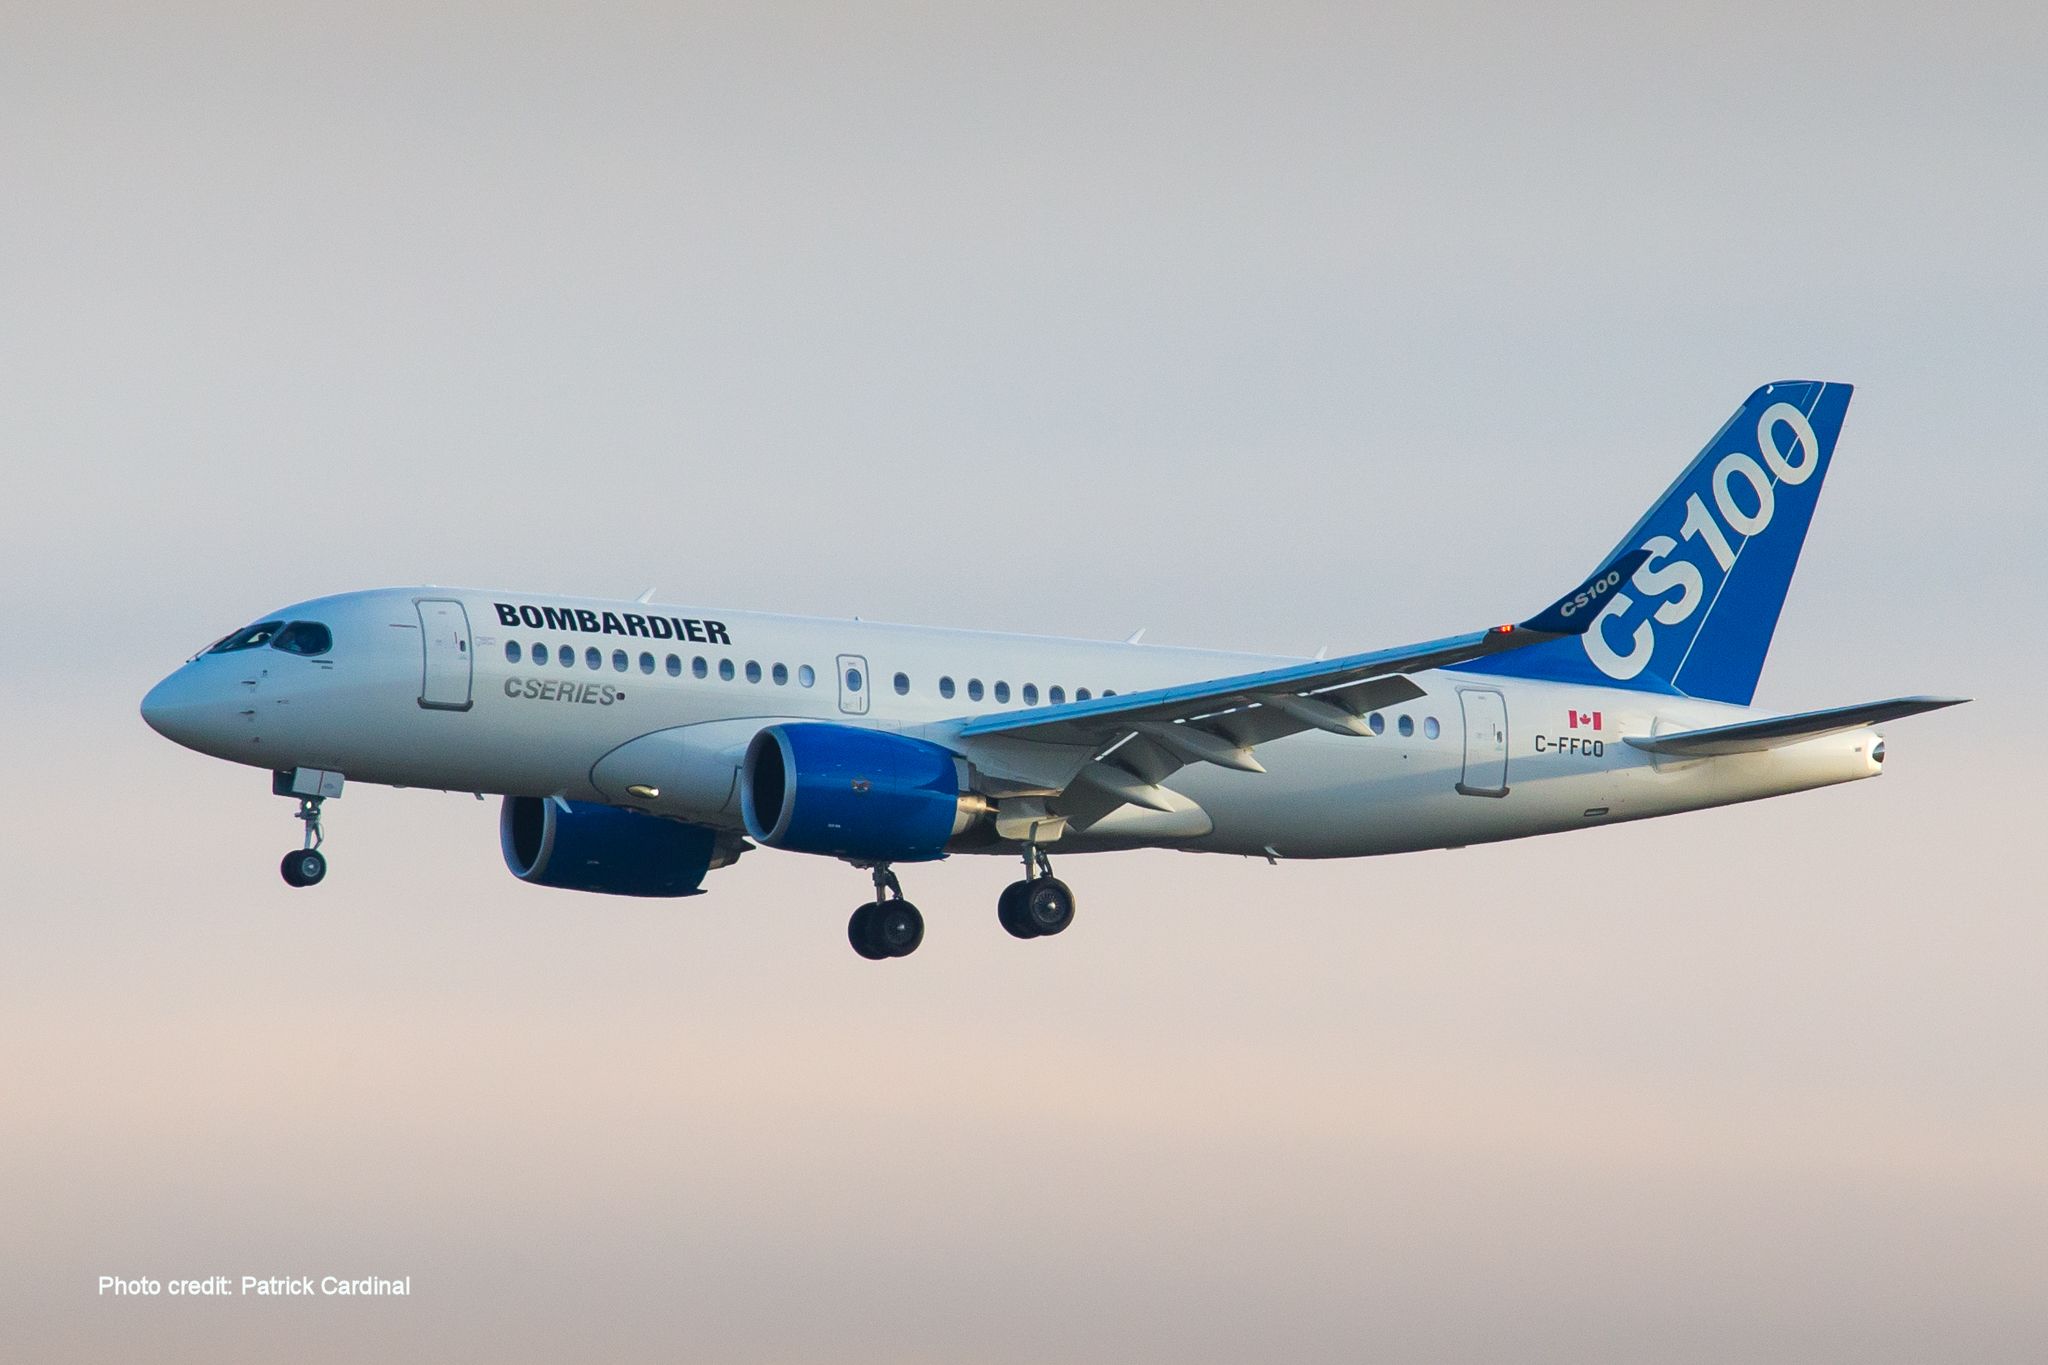 bombardier-s-cseries-completes-flight-certification-testing-economy-class-beyond